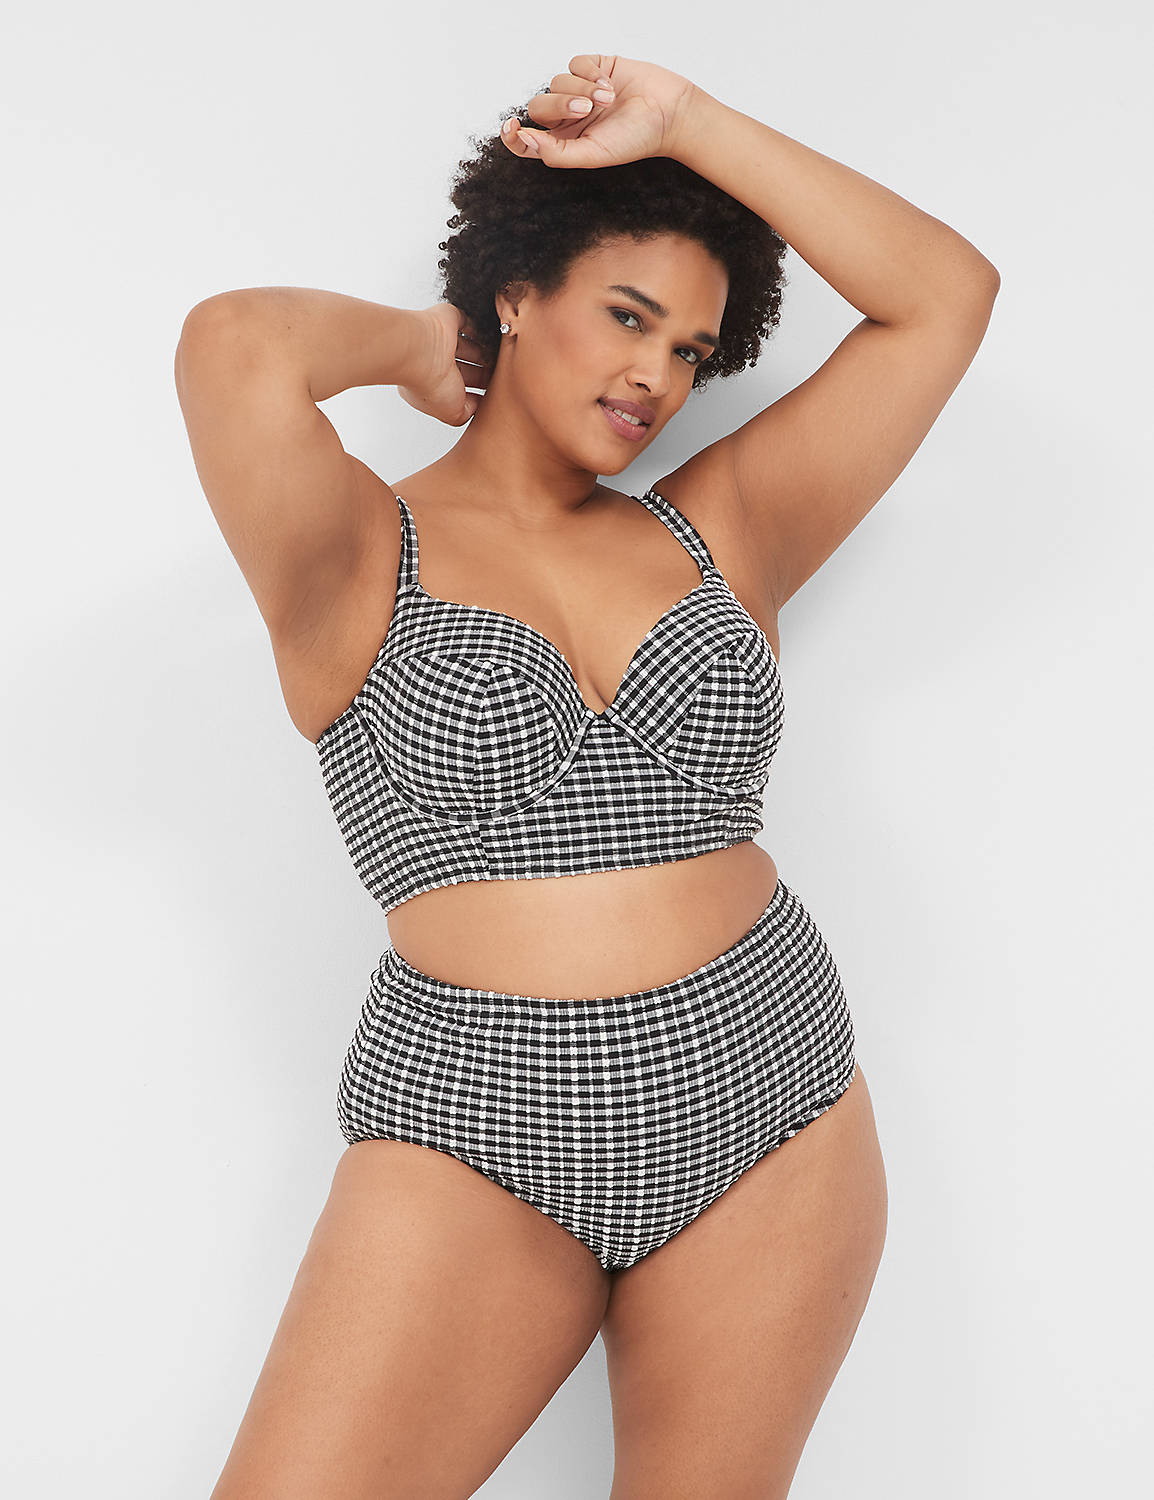 Gingham Brief 1138788 Product Image 3